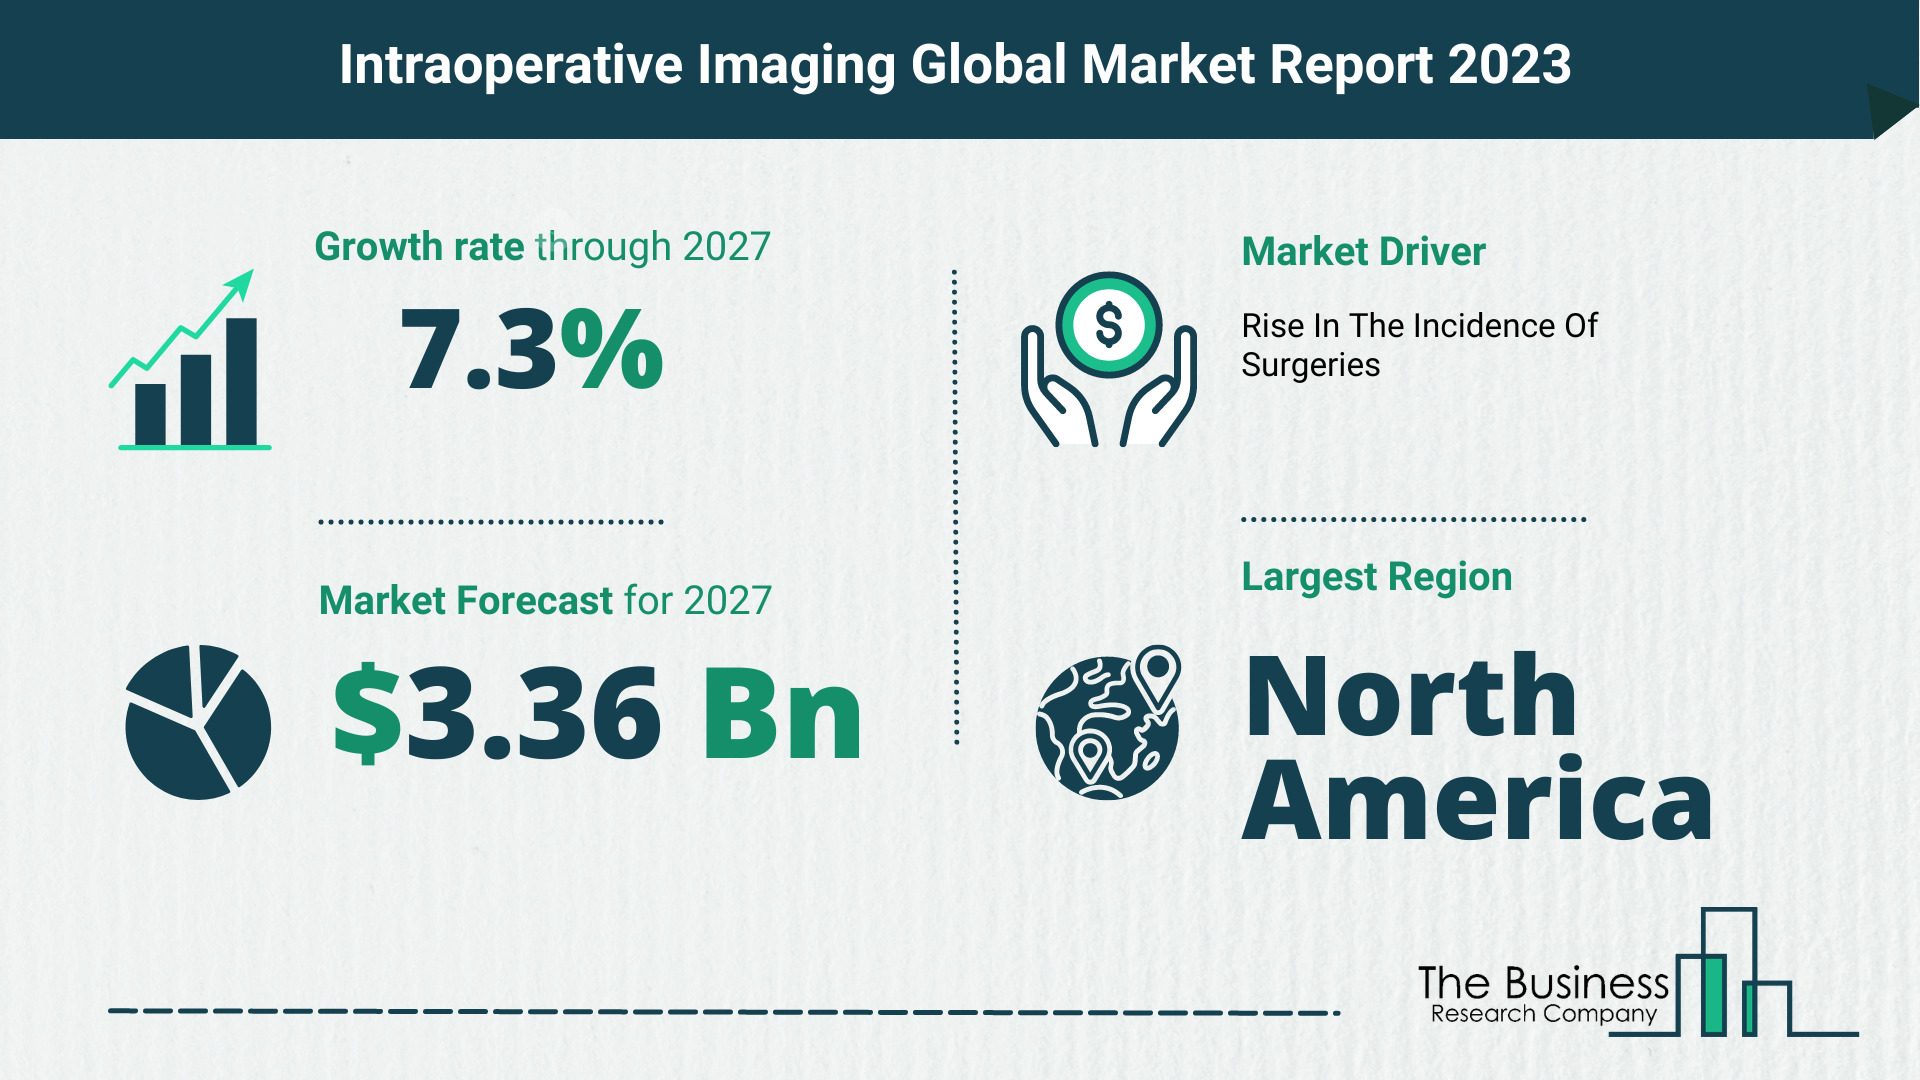 Global Intraoperative Imaging Market Opportunities And Strategies 2023